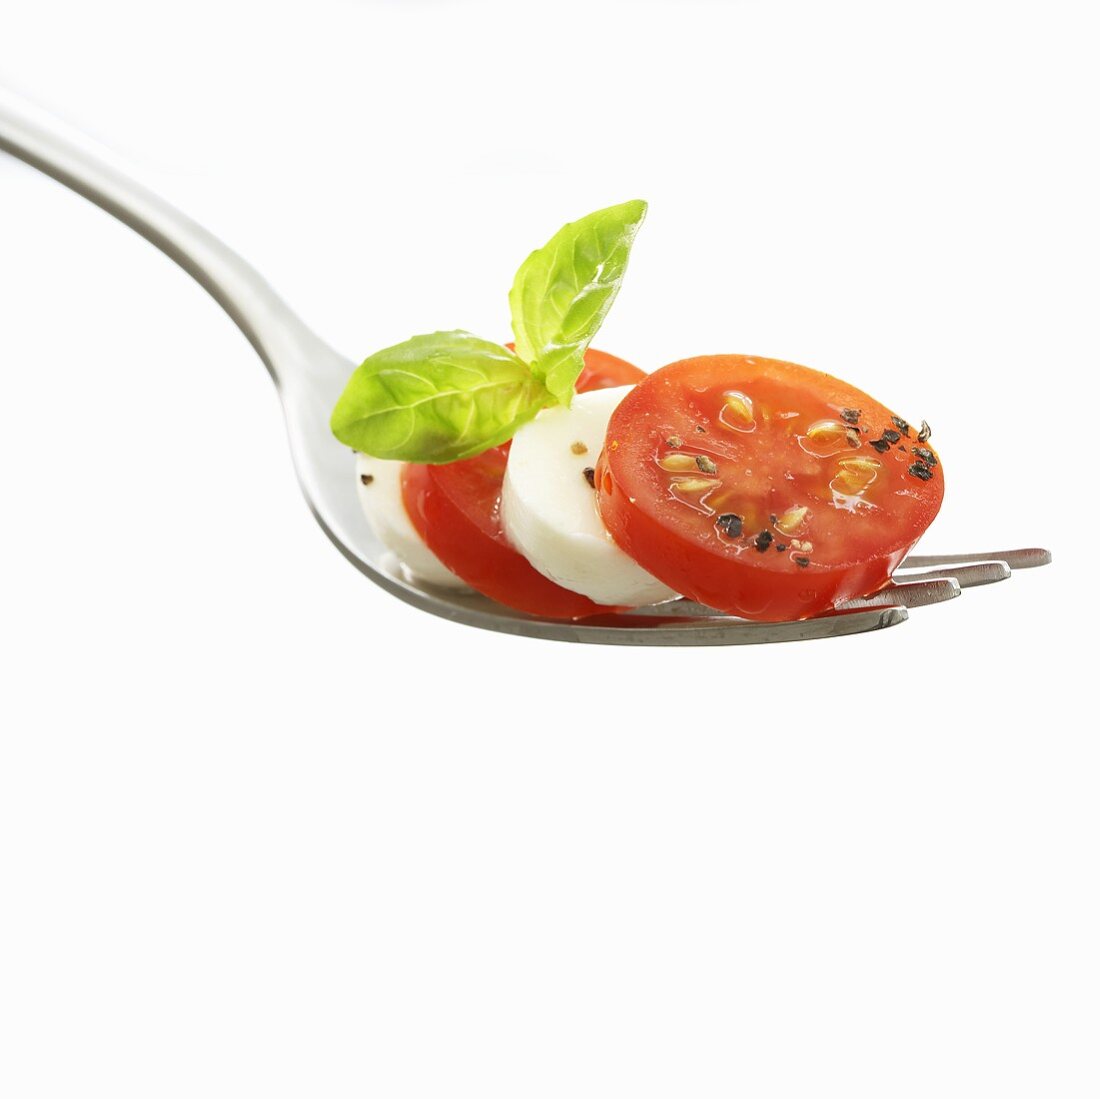 Tomato slices with mozzarella and basil on fork